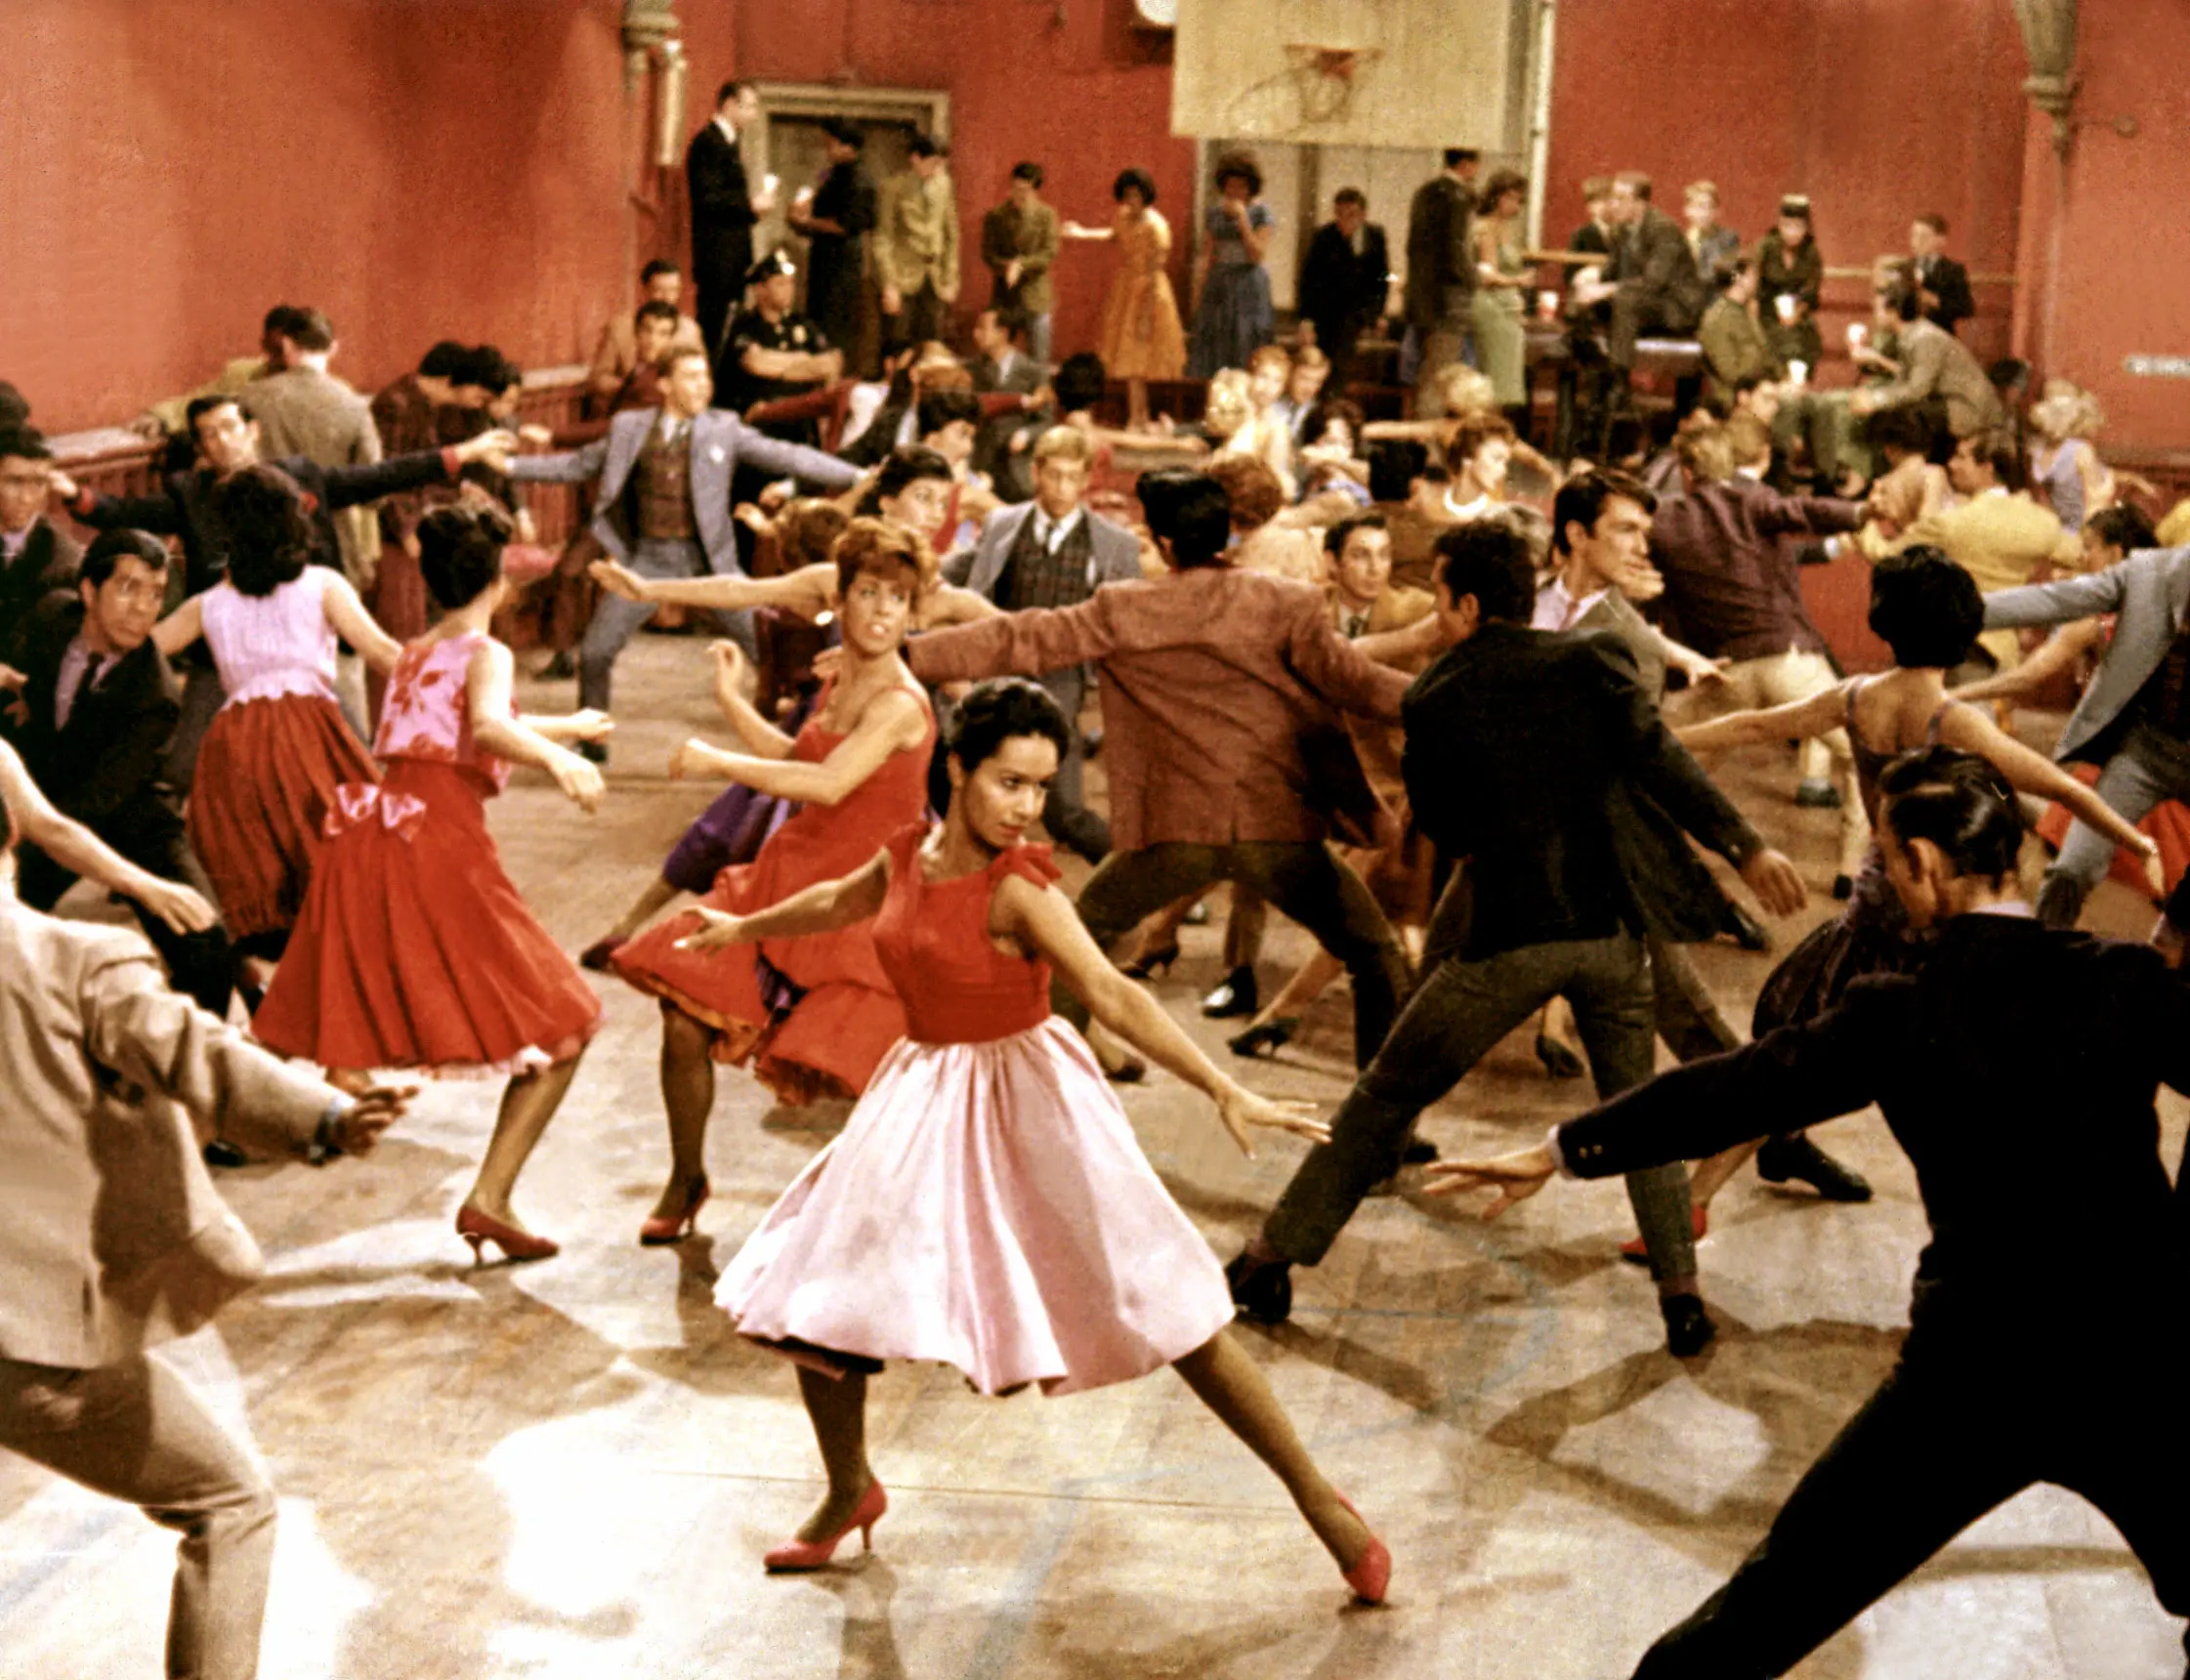 WEST SIDE STORY, 1961 